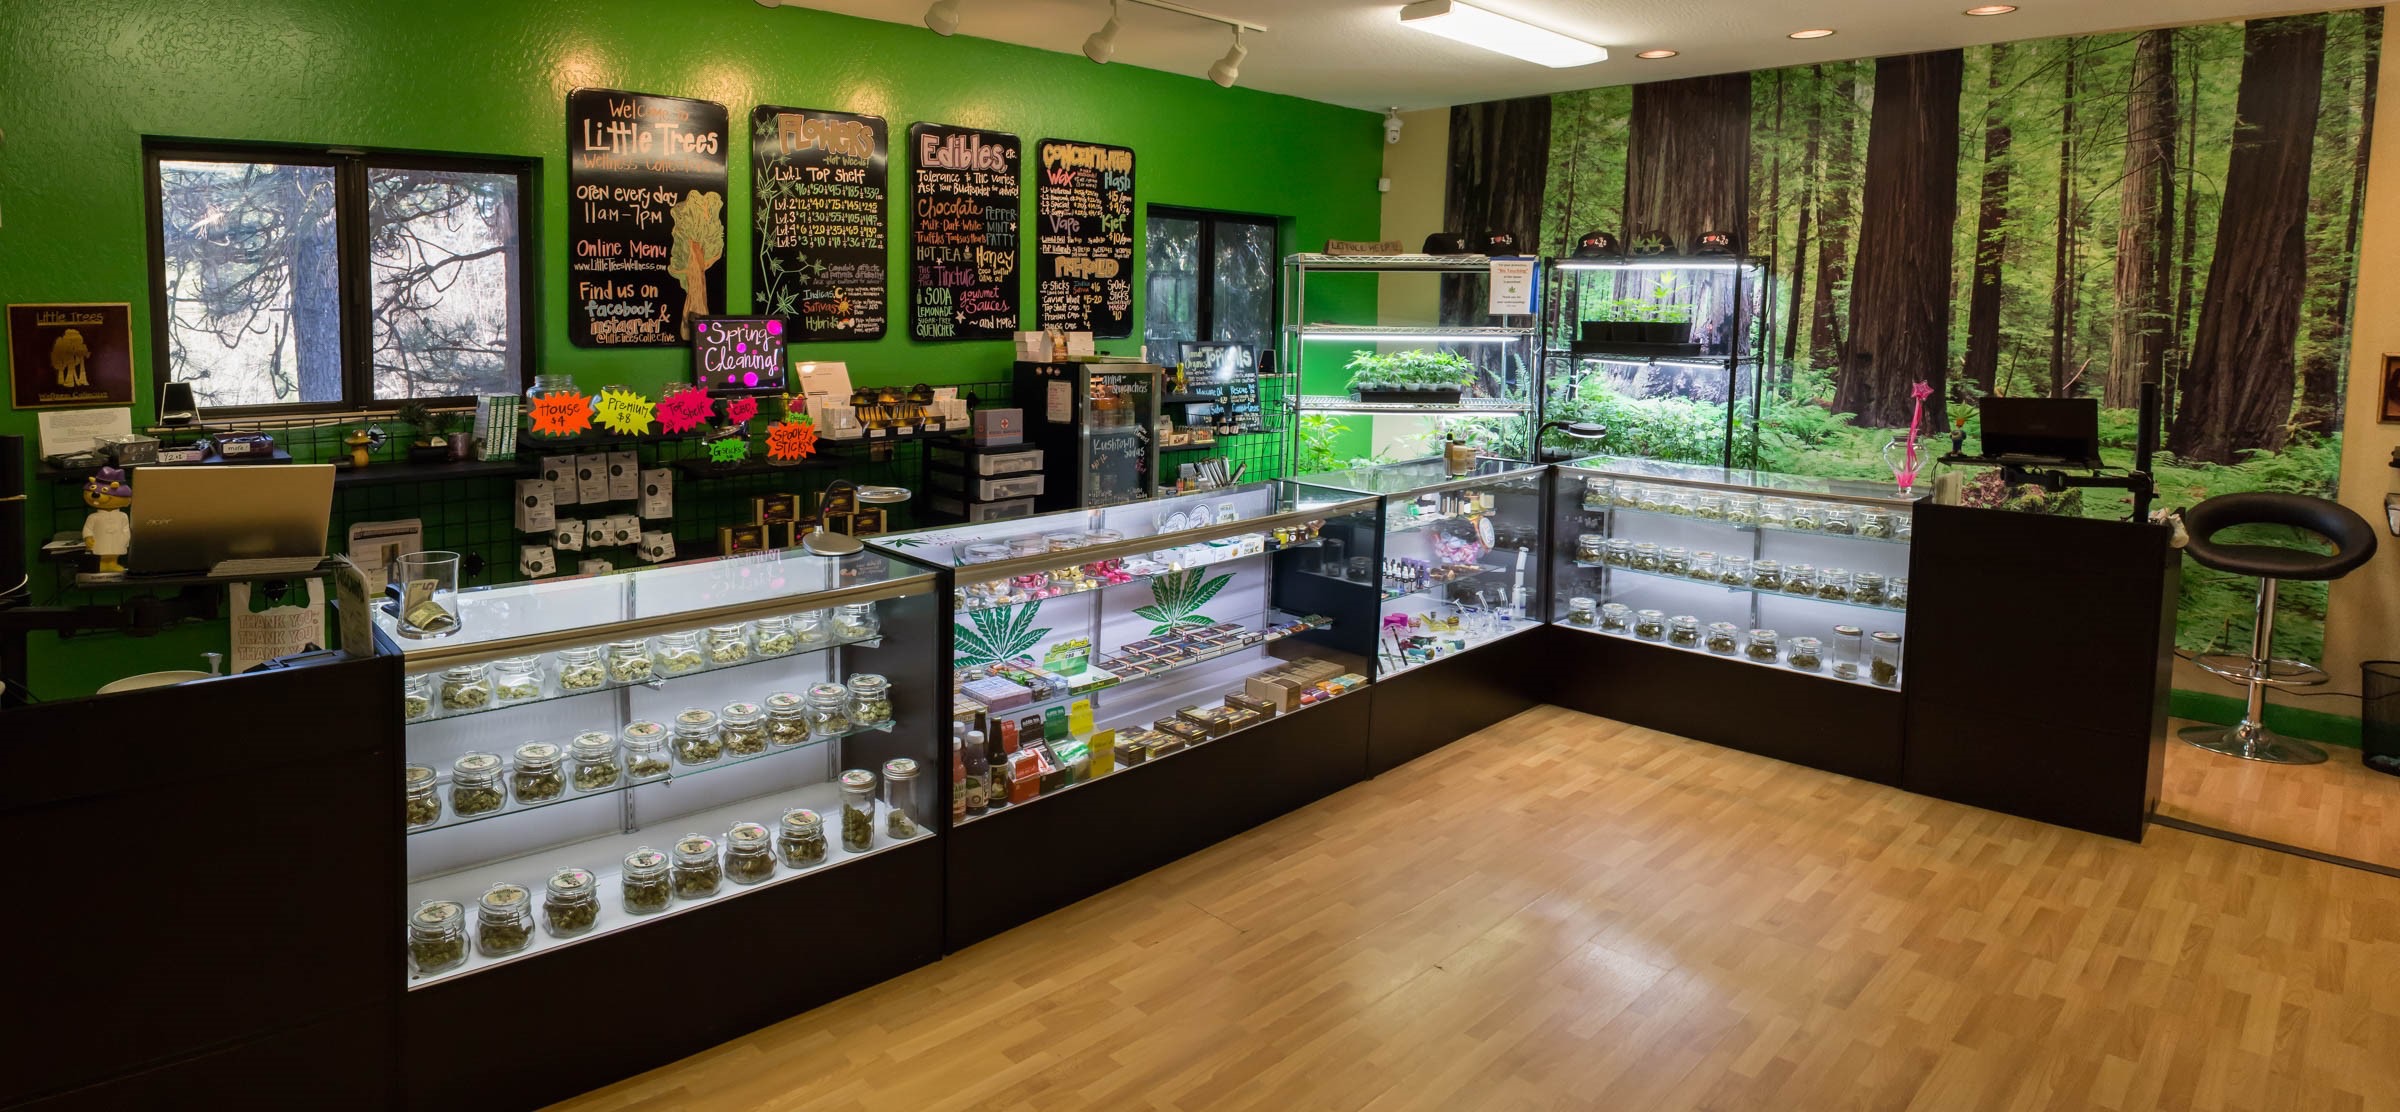 Calaveras Little Trees offers a collection of strains, seeds, CBD products, edibles and more.